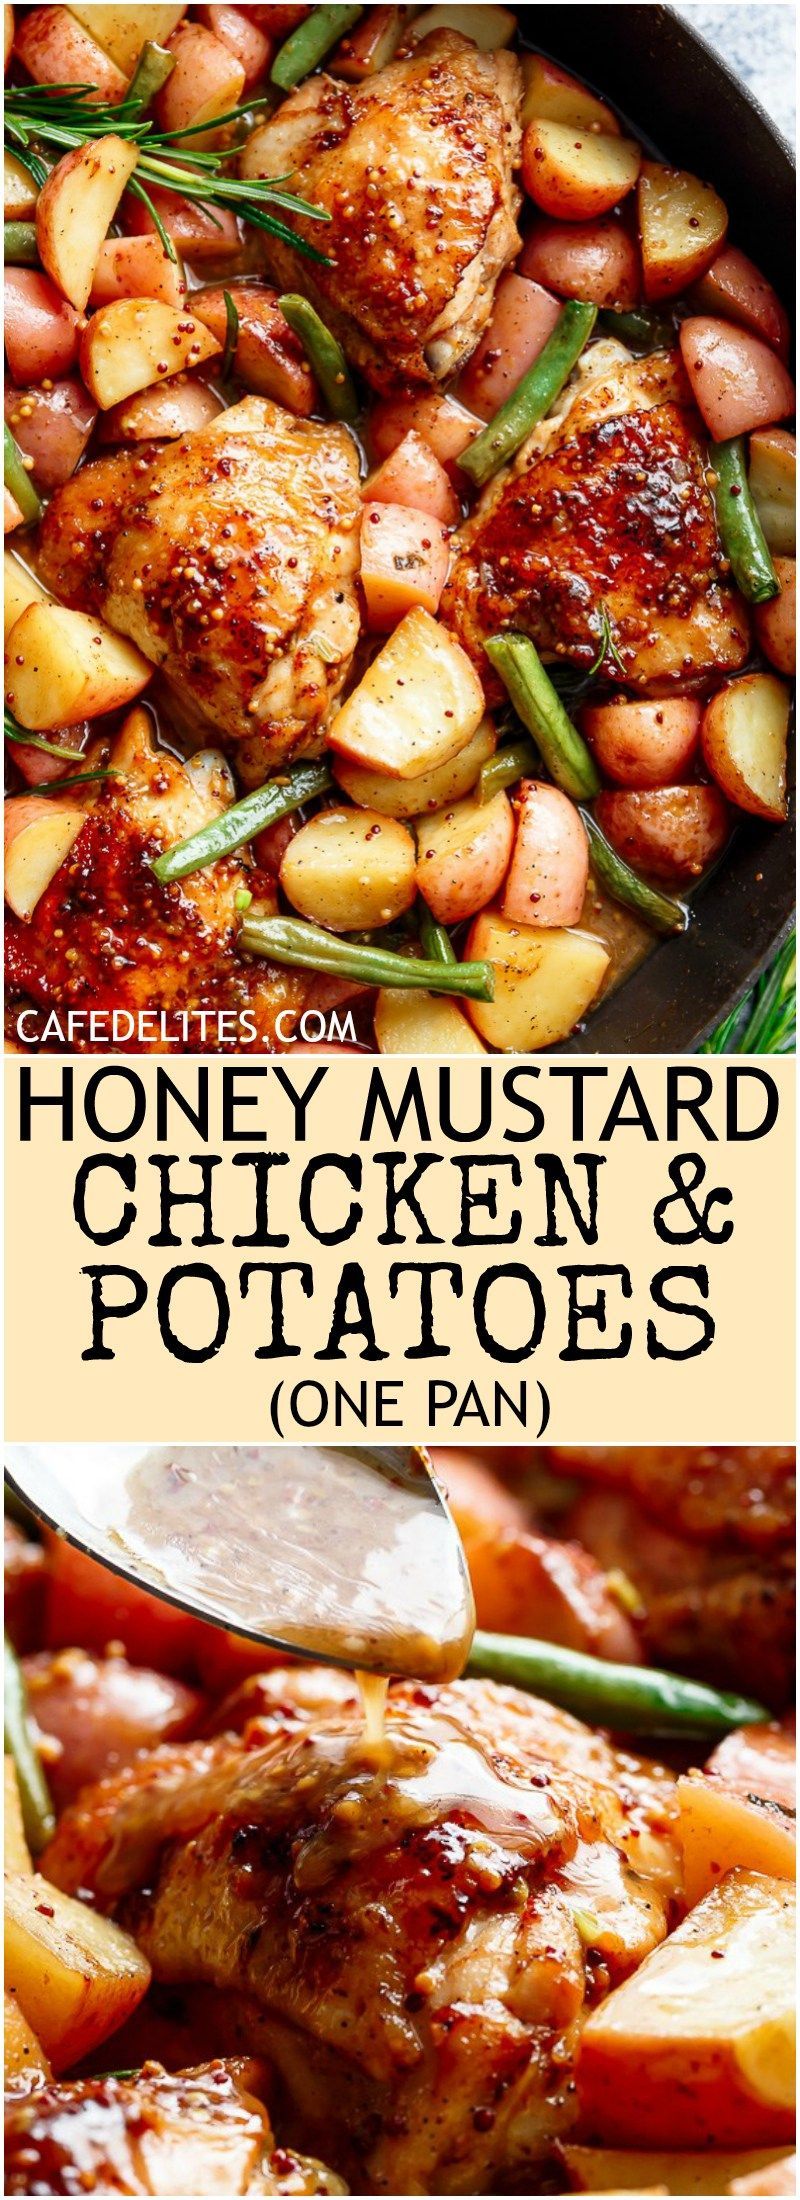 Honey Mustard Chicken & Potatoes is all made in one pan! Juicy, succulent chicken pieces are cooked in the best honey mustard